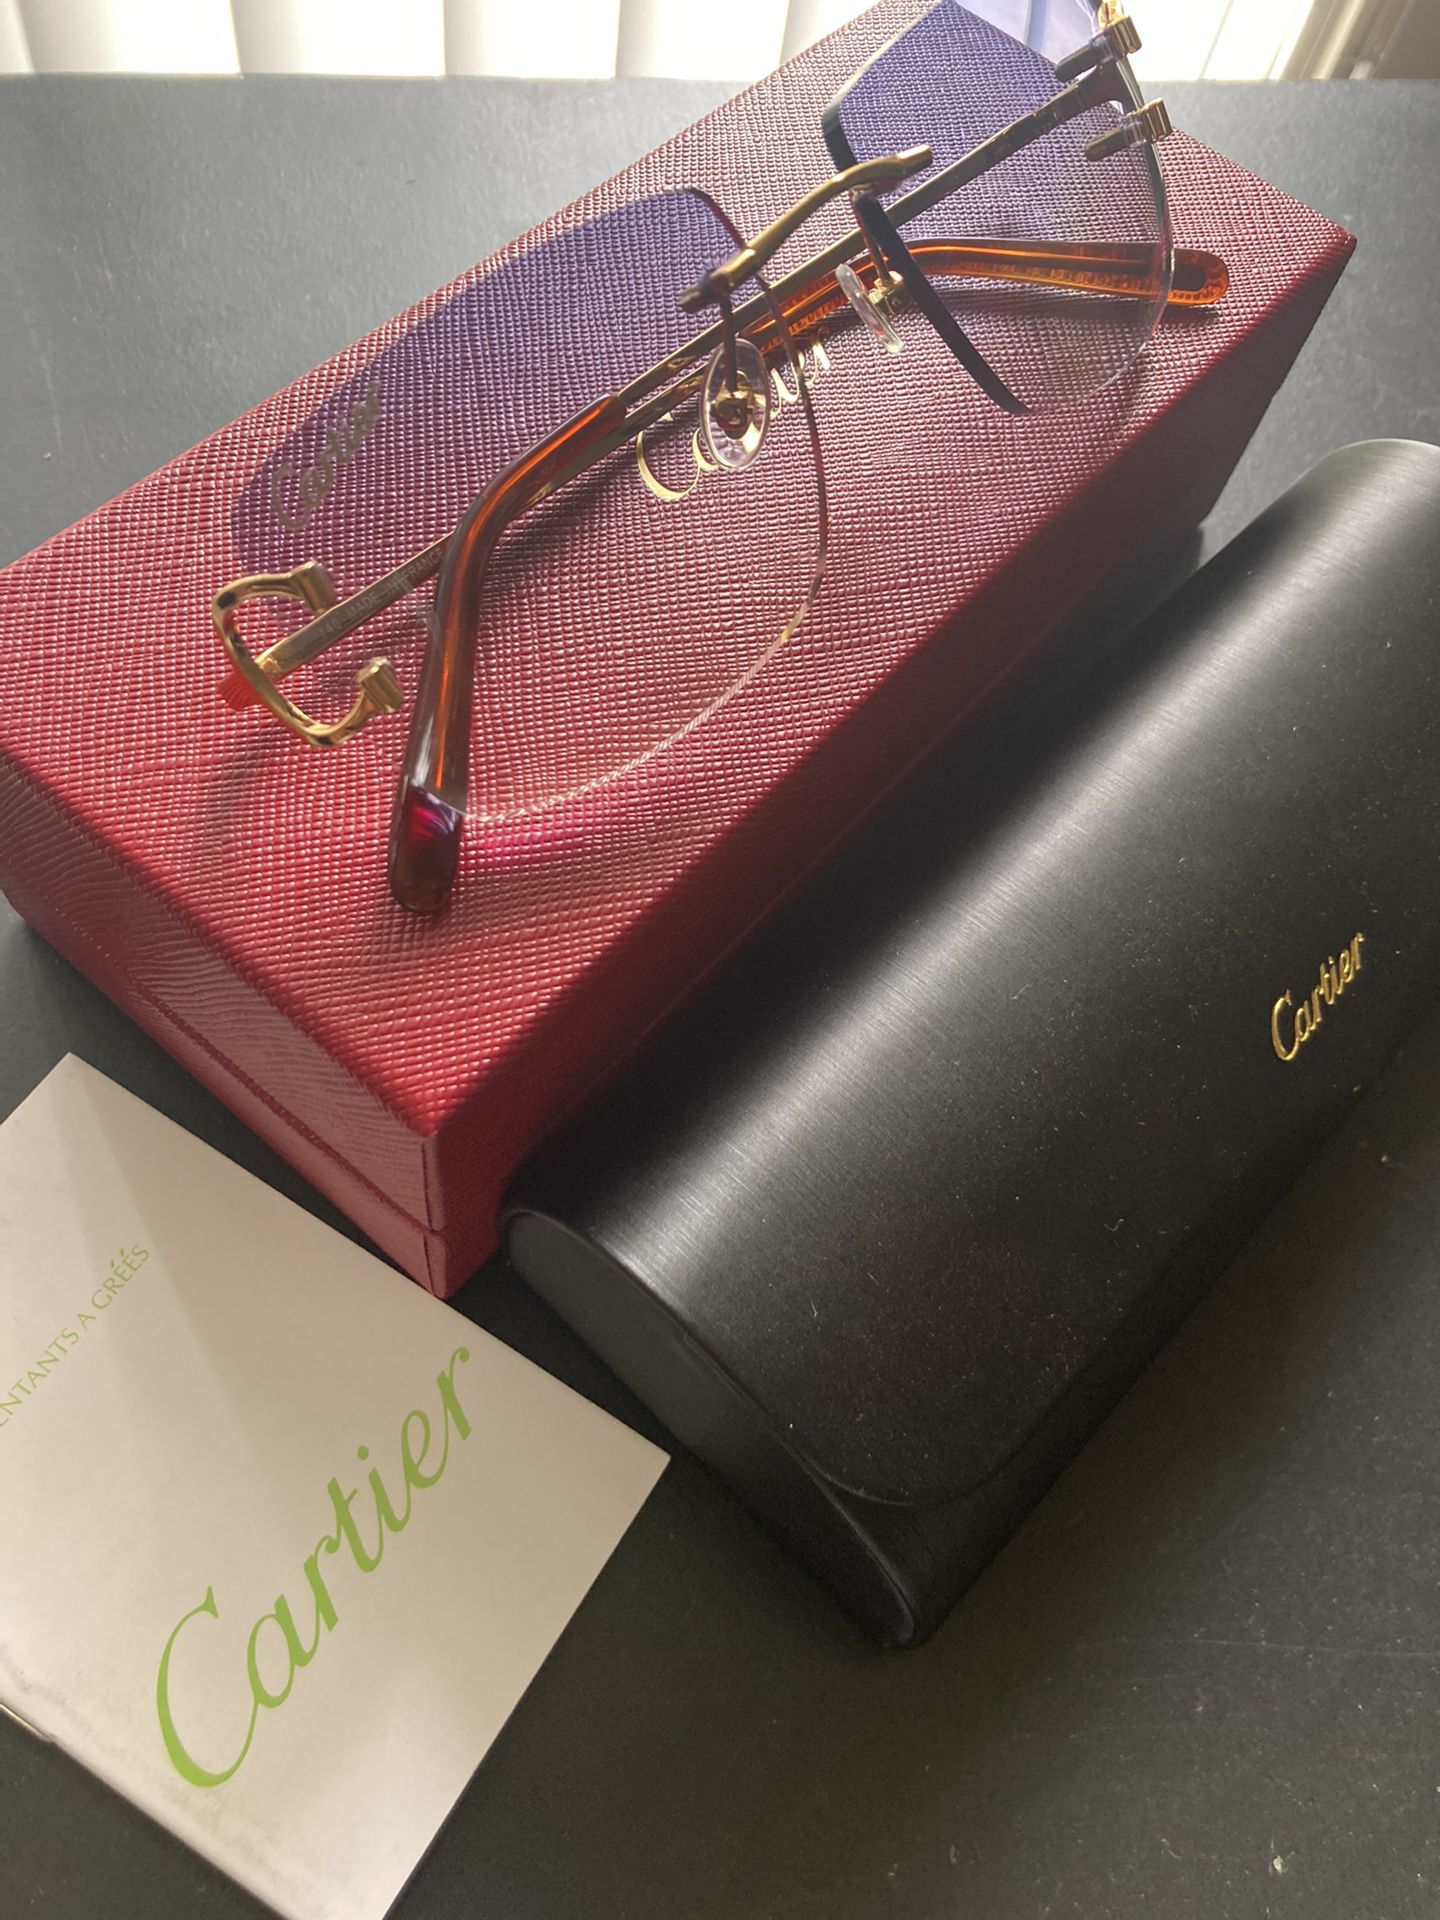 Cartier Piccadilly Sunglasses